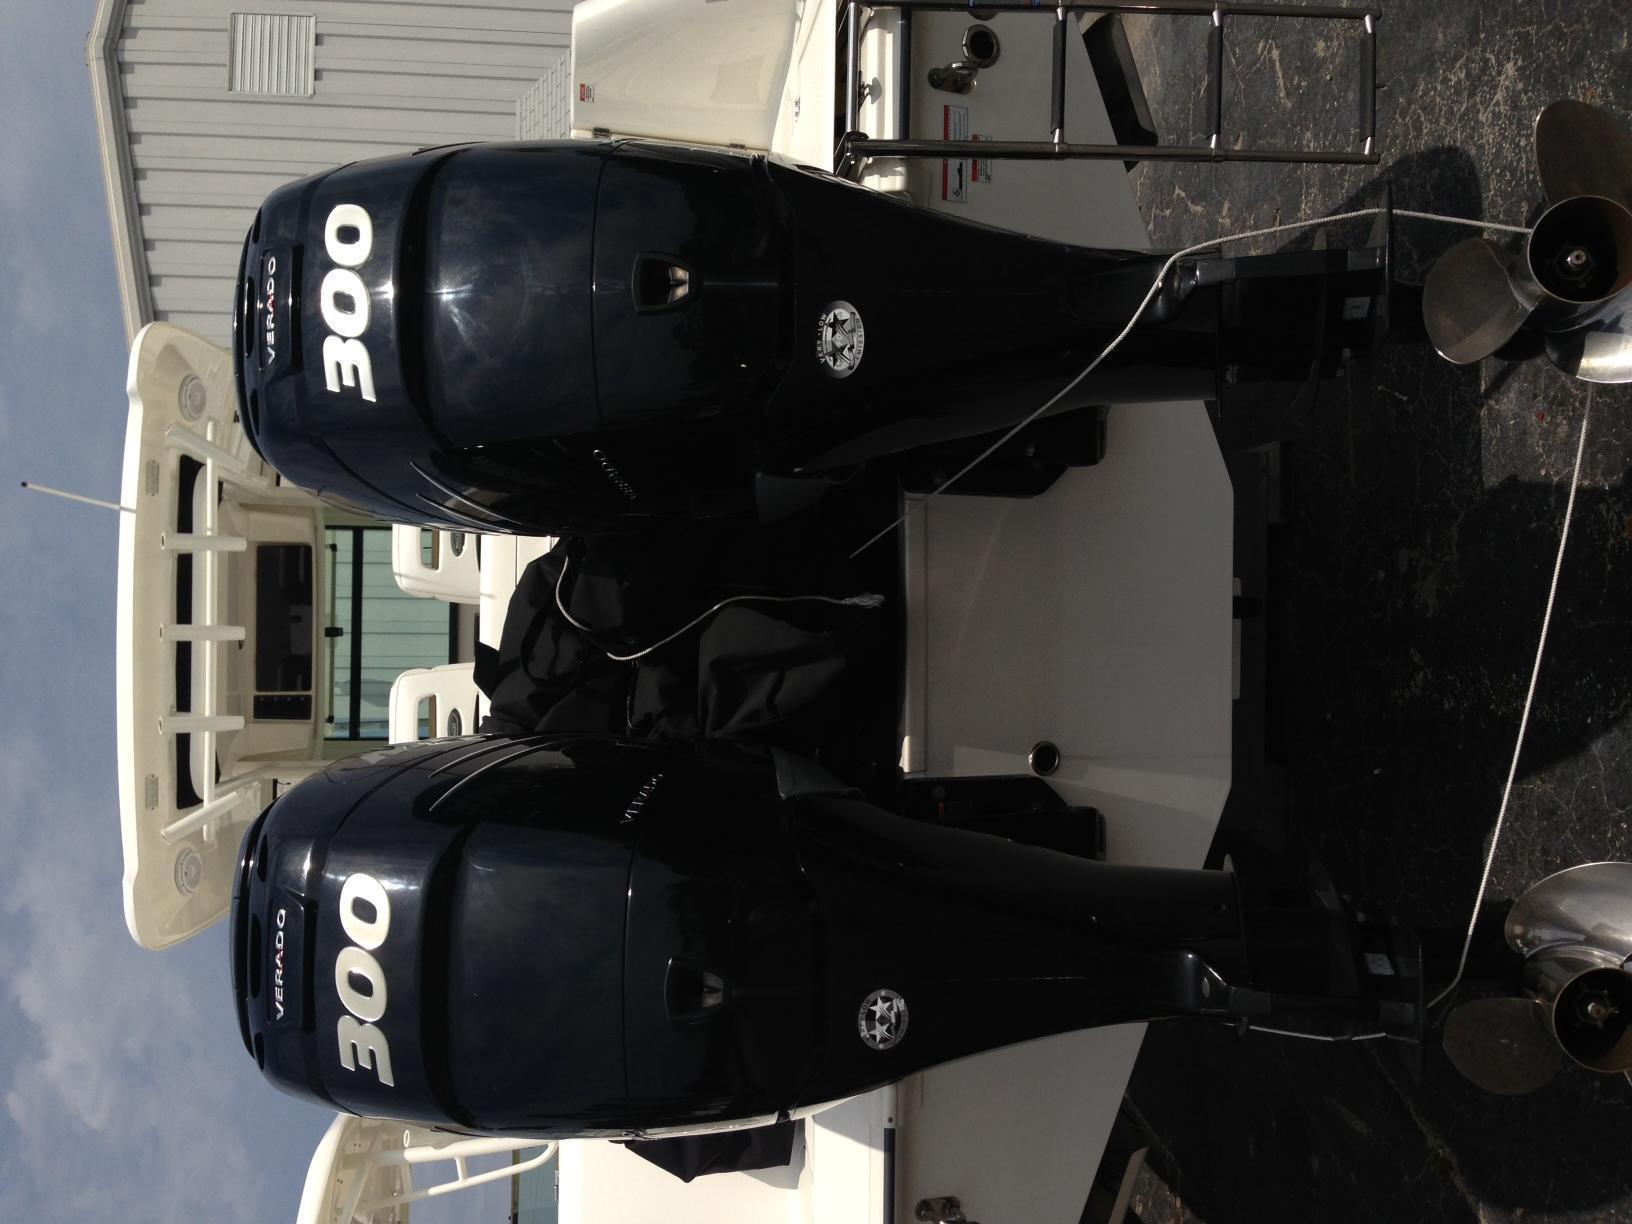 Boston Whaler 32 Outrage, Ft. Myers